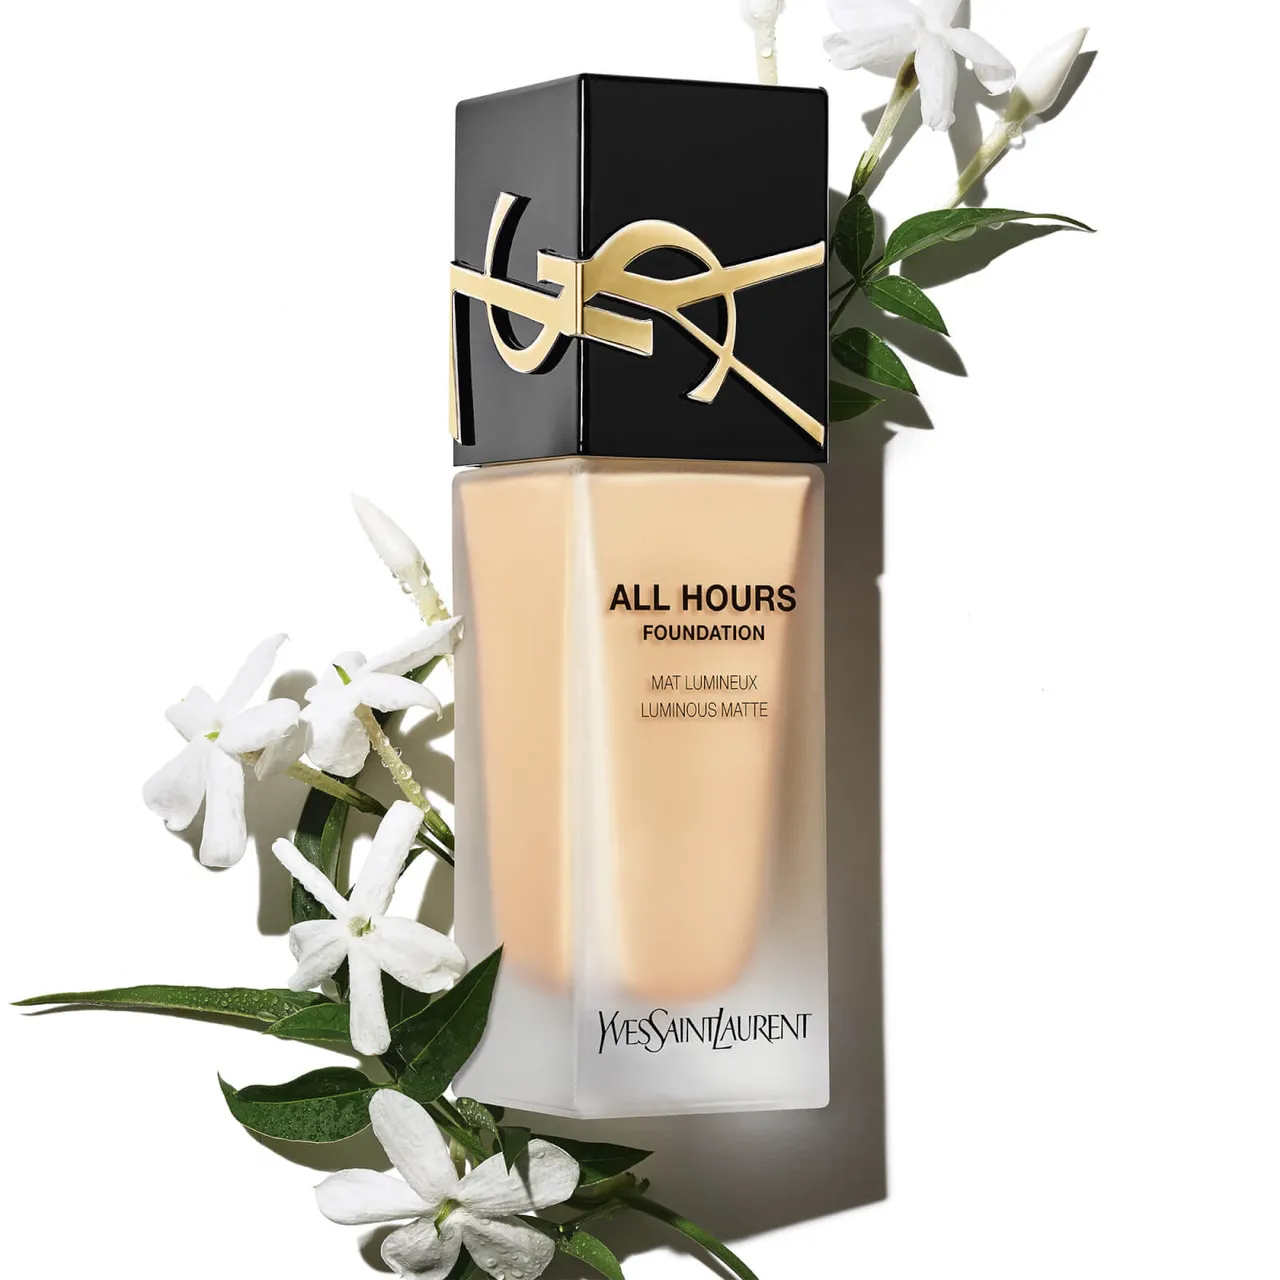 Yves Saint Laurent All Hours Luminous Matte Foundation with SPF 39 25ml (Various Shades) - LN4